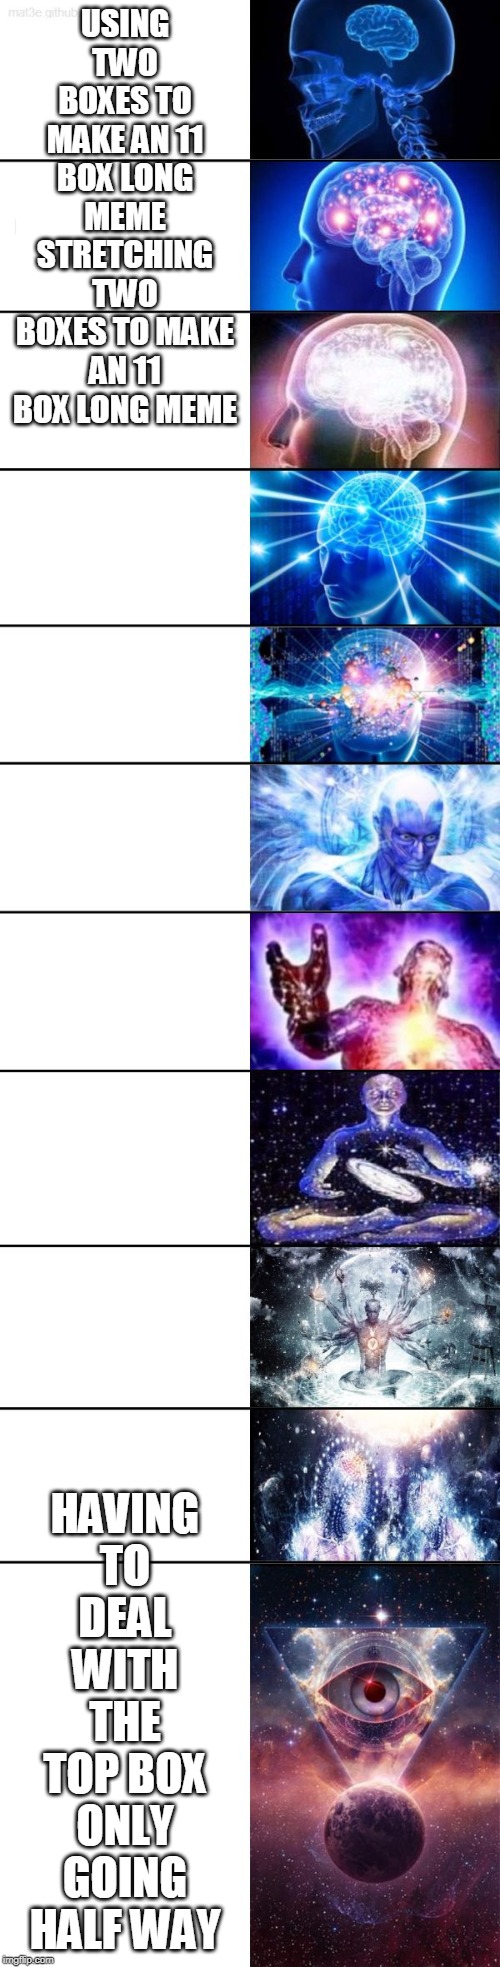 Big Brain Meme | USING TWO BOXES TO MAKE AN 11 BOX LONG MEME STRETCHING TWO BOXES TO MAKE AN 11 BOX LONG MEME; HAVING TO DEAL WITH THE TOP BOX ONLY GOING HALF WAY | image tagged in big brain meme | made w/ Imgflip meme maker